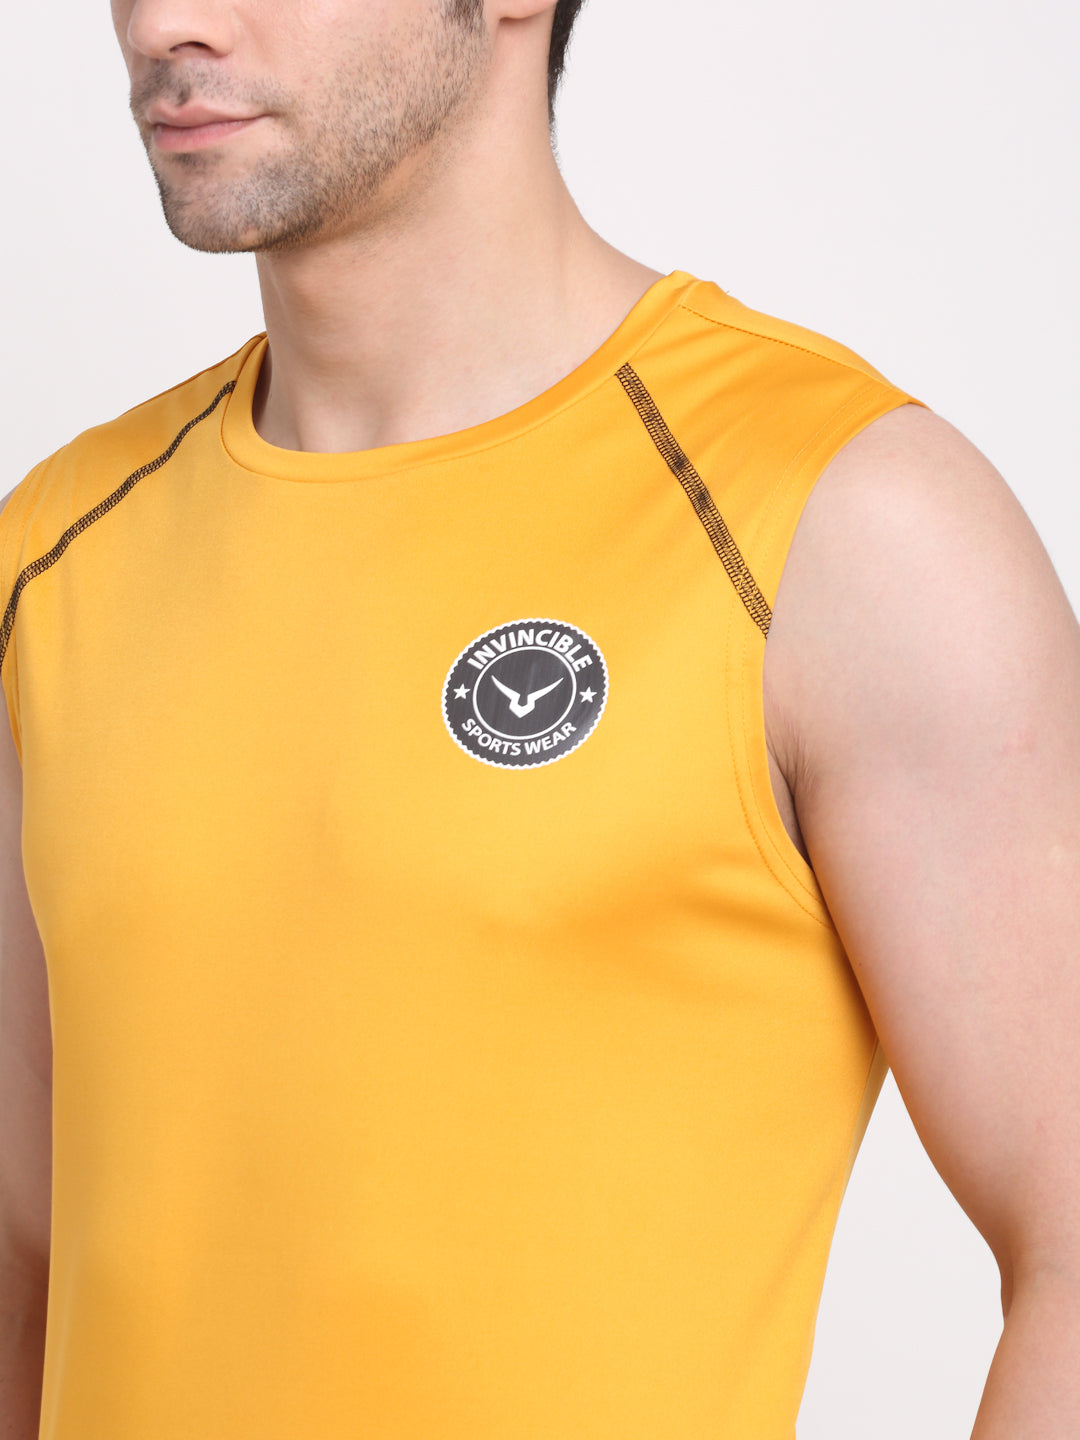 Invincible Men's Sleeveless Tee With Detail